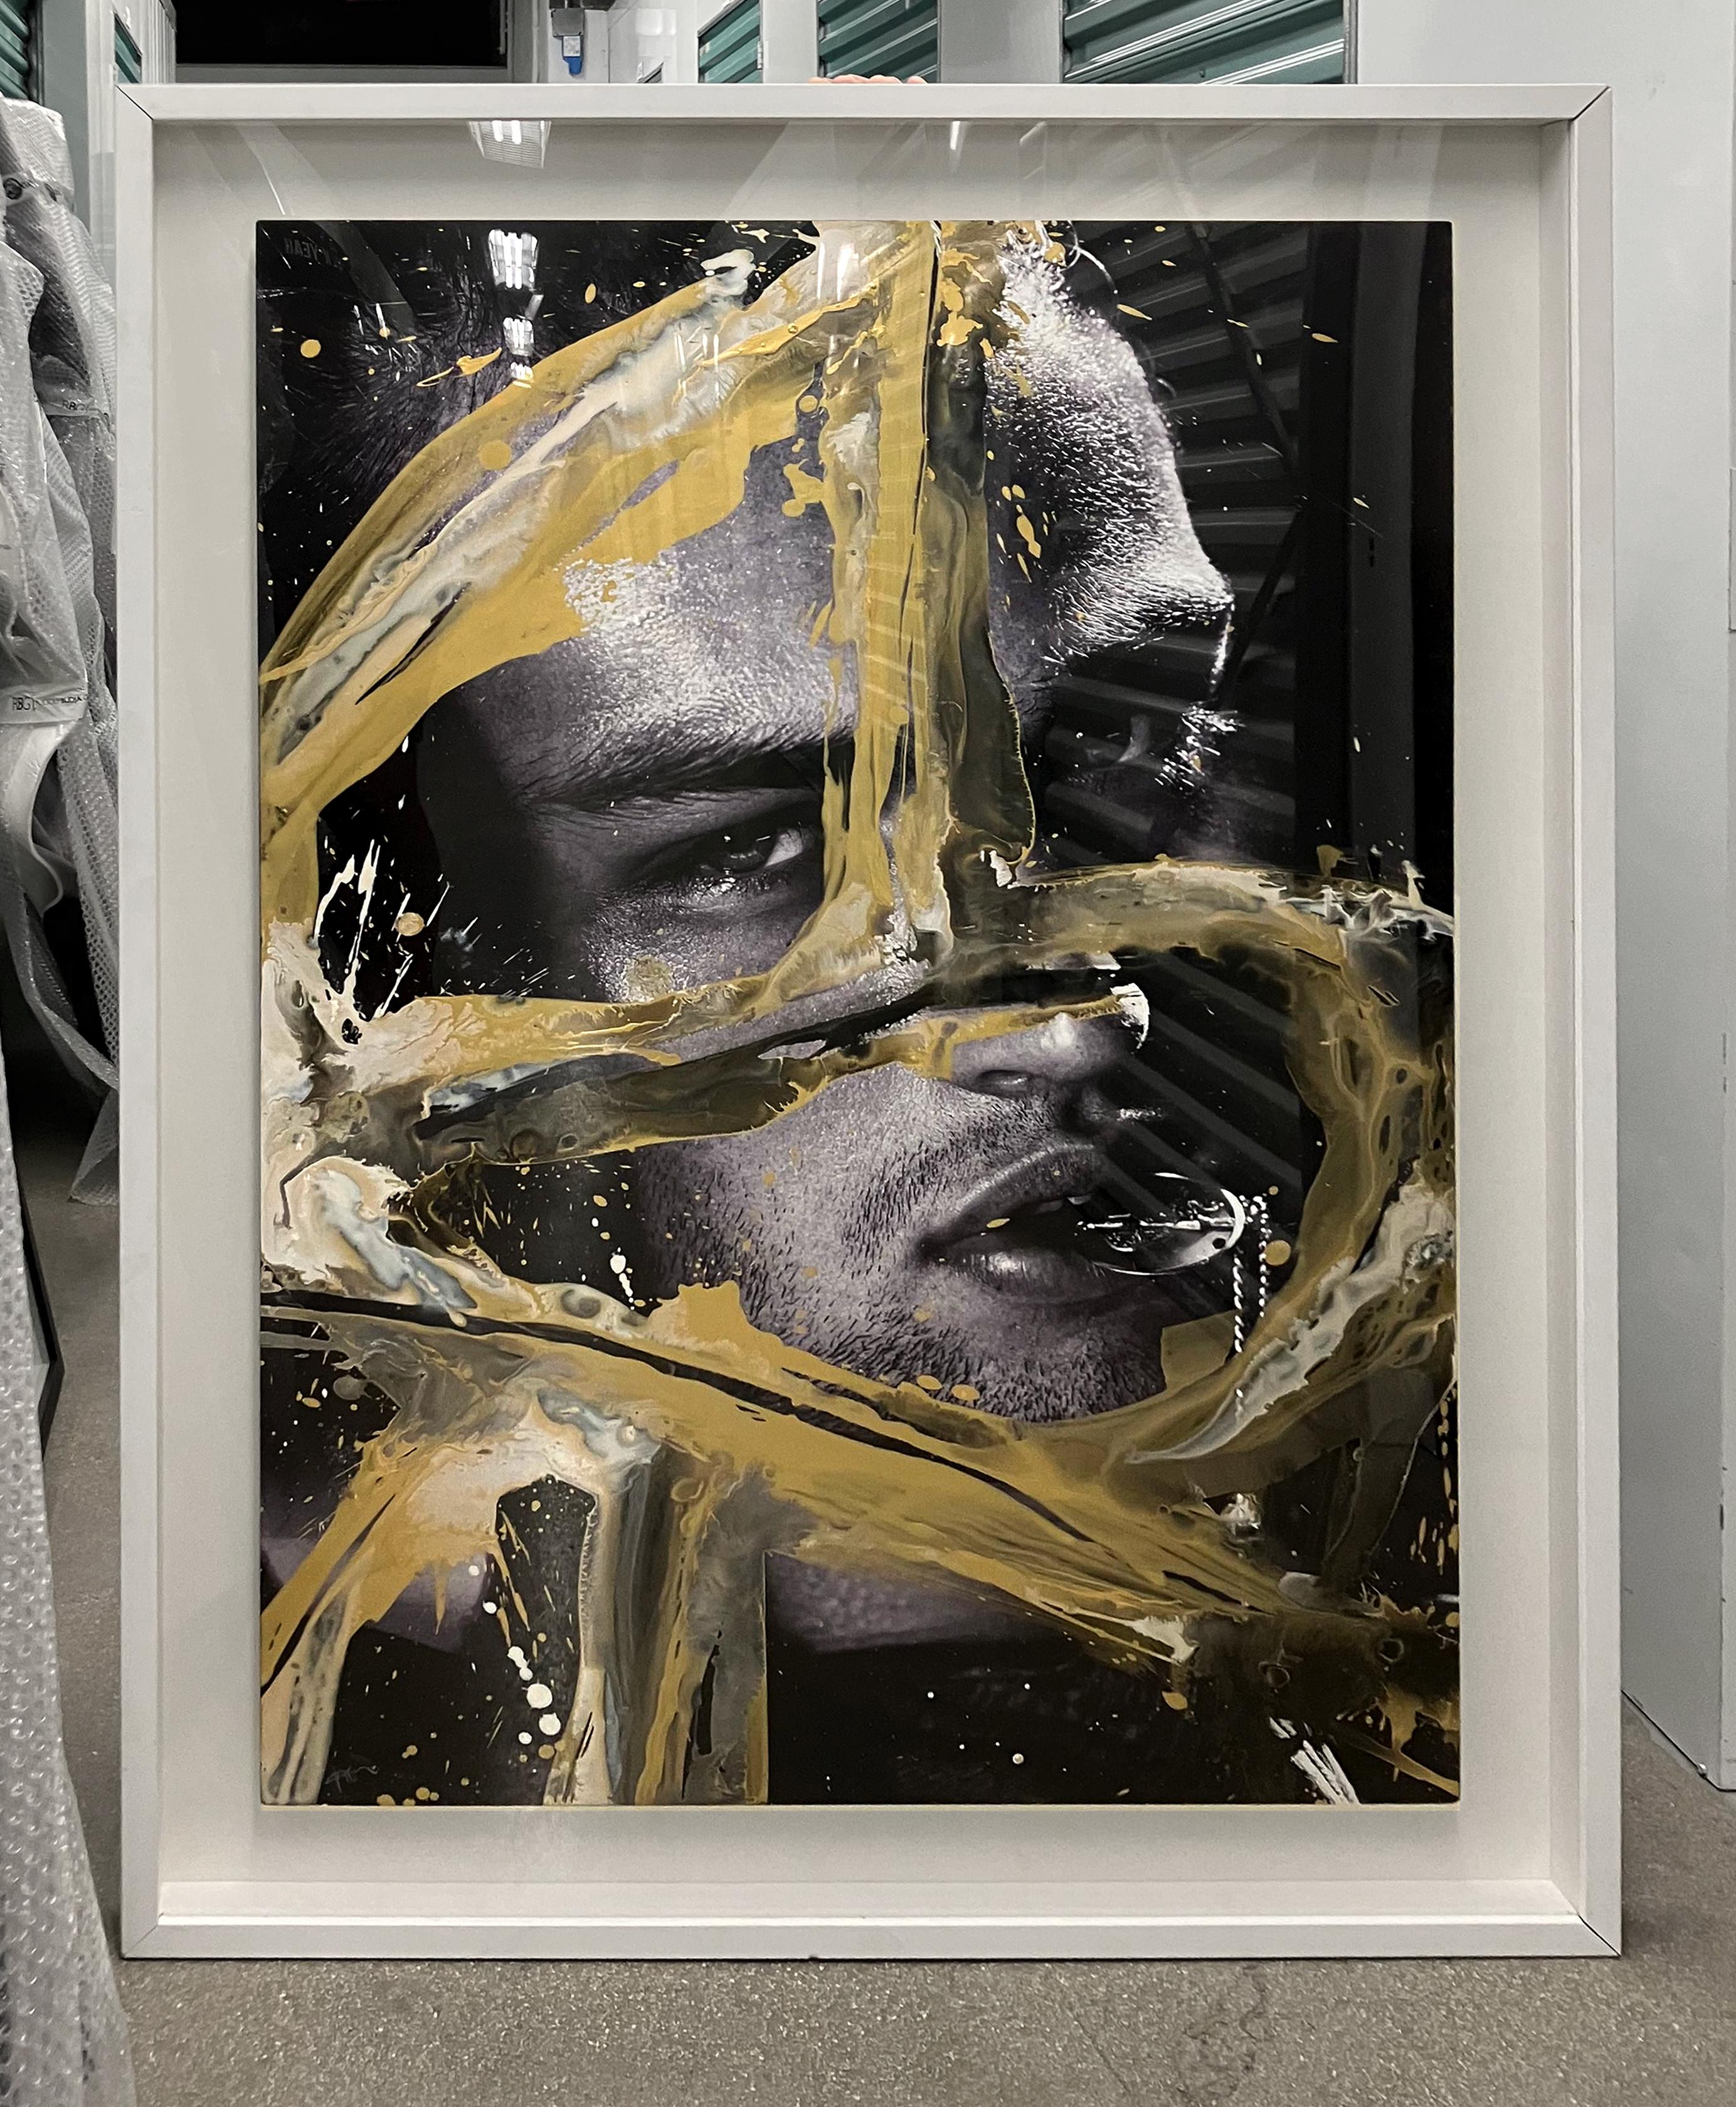 Douglas Booth II, 2015 by Hunter & Gatti
From the series IWMYAS
Mixed media on Black and white photography
Image size: 45 H x 31.5 W in. 
Frame size: 53 H x 39 W in. x 2 D in.
White wood Frame

Intervened by the artist

The founders and artistic